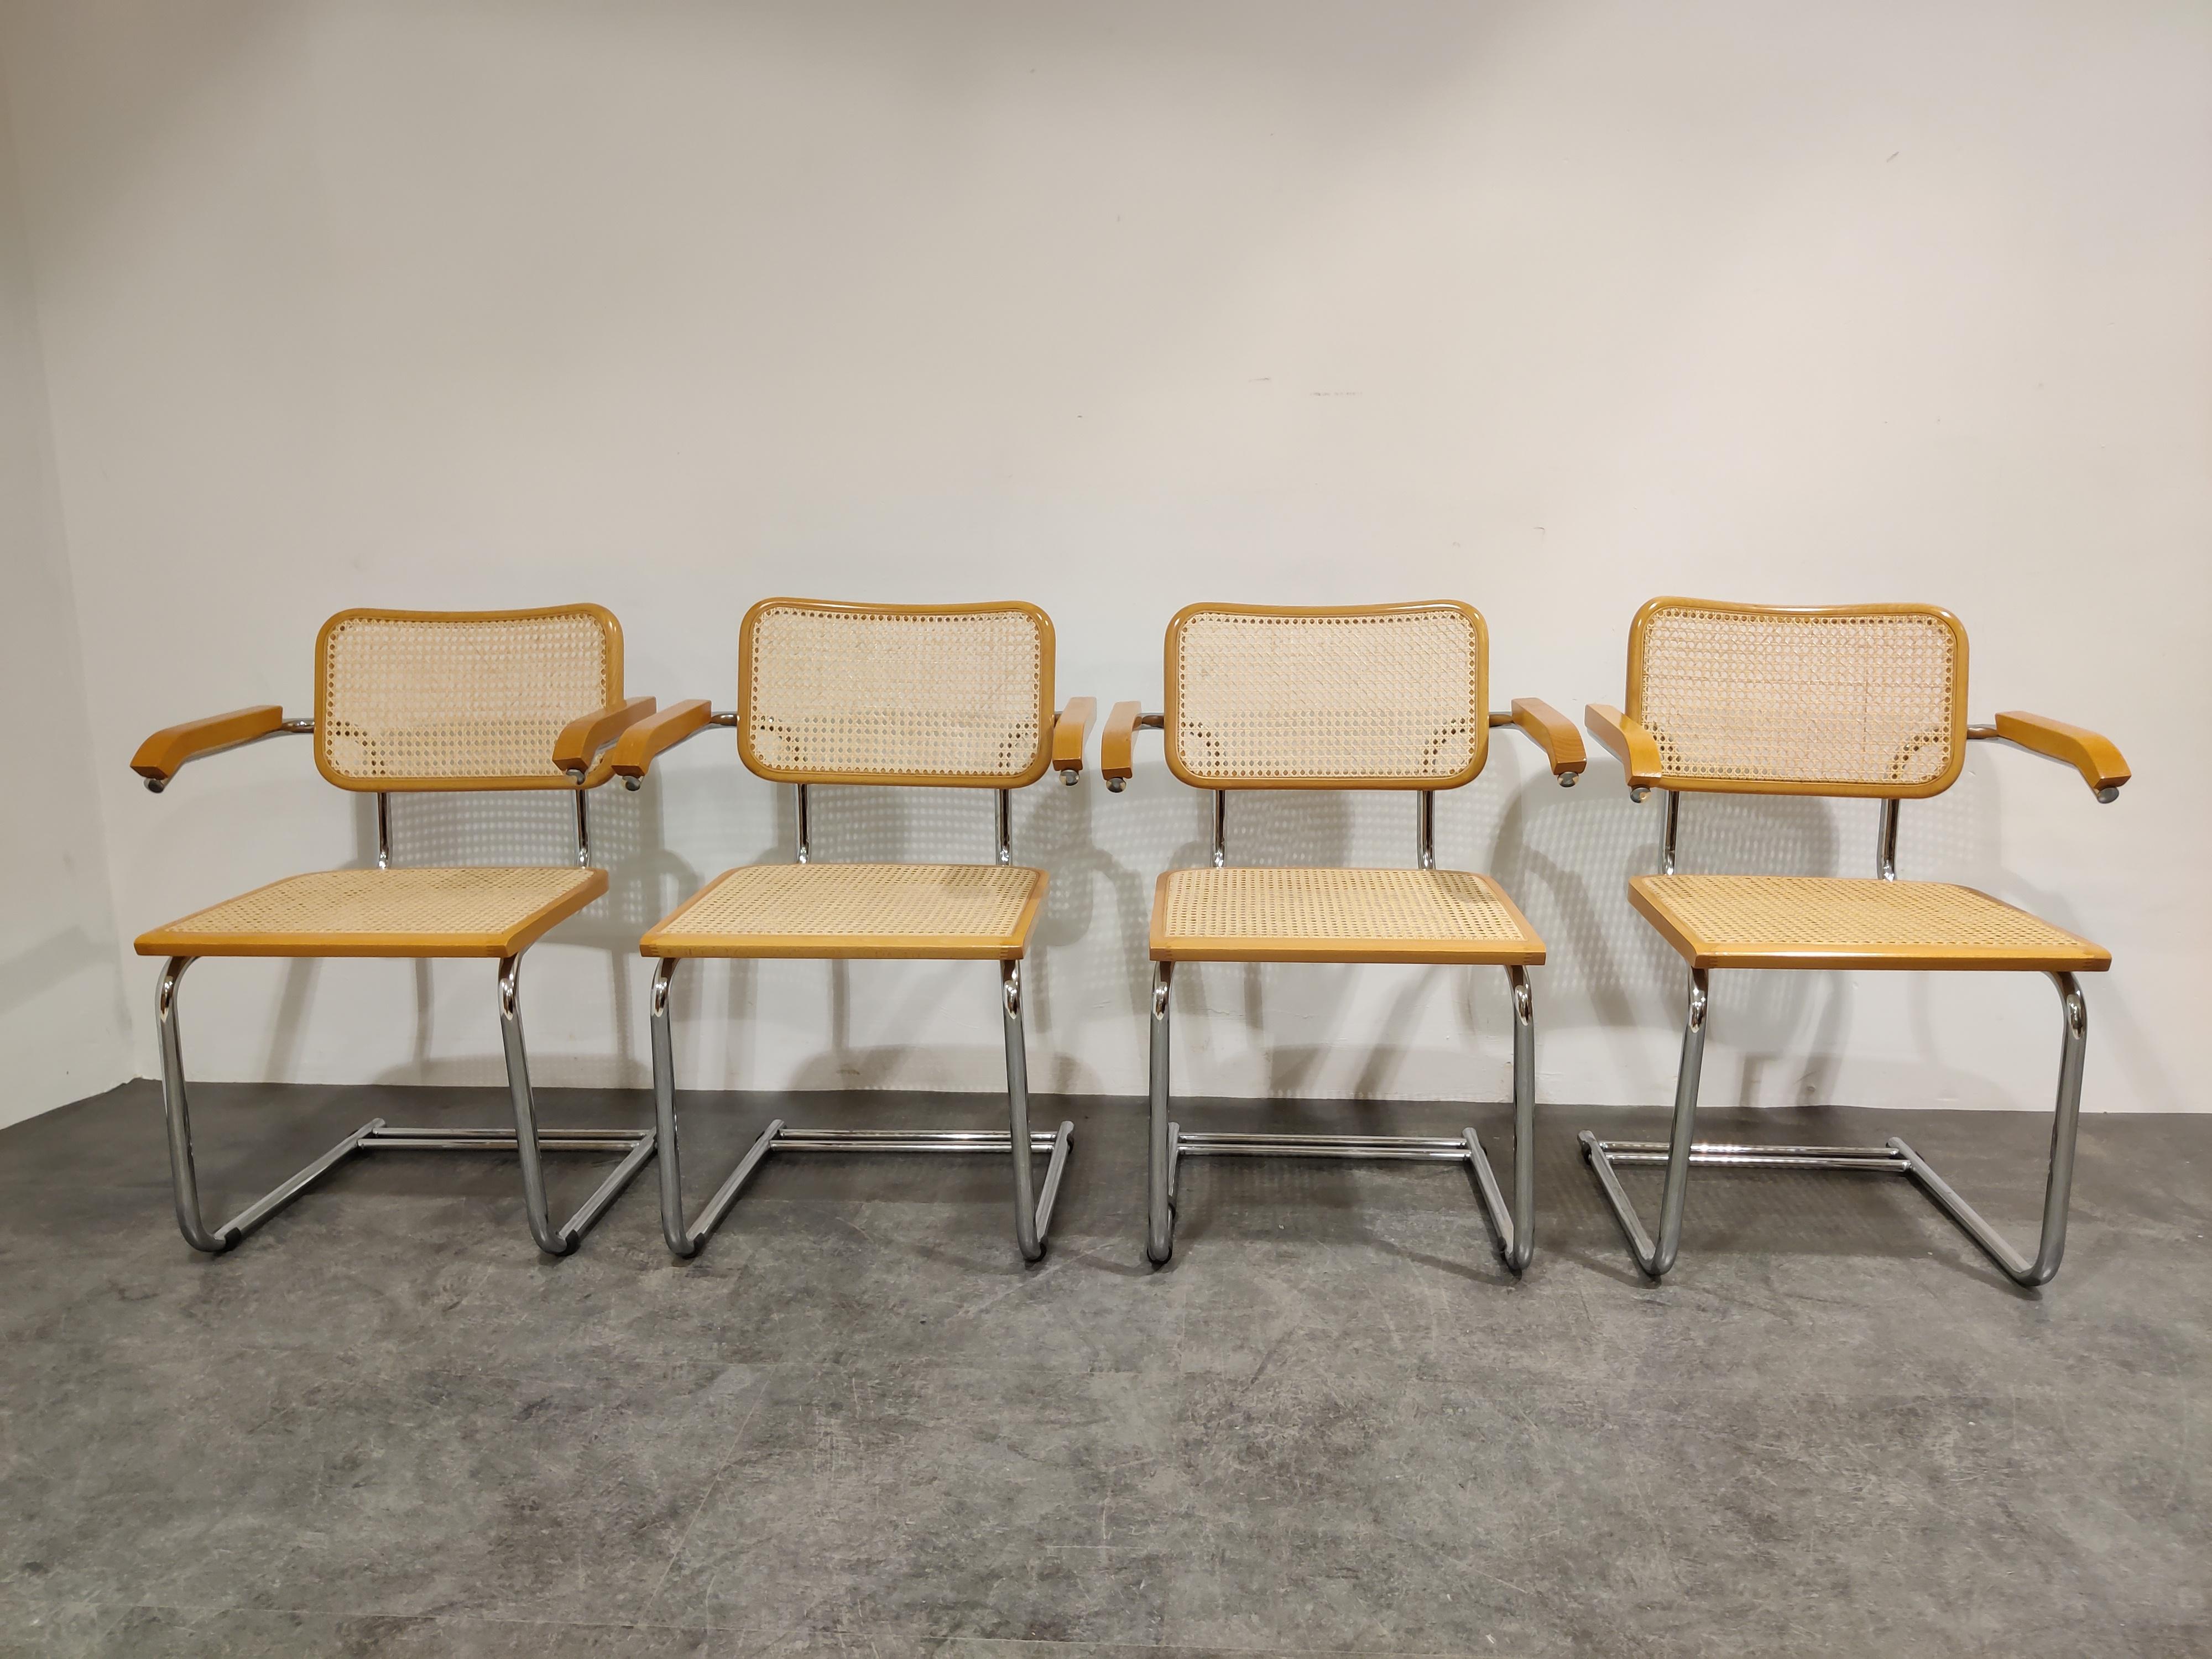 Beautiful Bauhaus style armchairs or dining chairs very much in the style of Marcel Breuer's Cesca chairs.

Notice the unusual cantilever base, a model we havent encountered before. 

Stamped 'made in italy'

1970s - Italy

Dimensions:
Height: